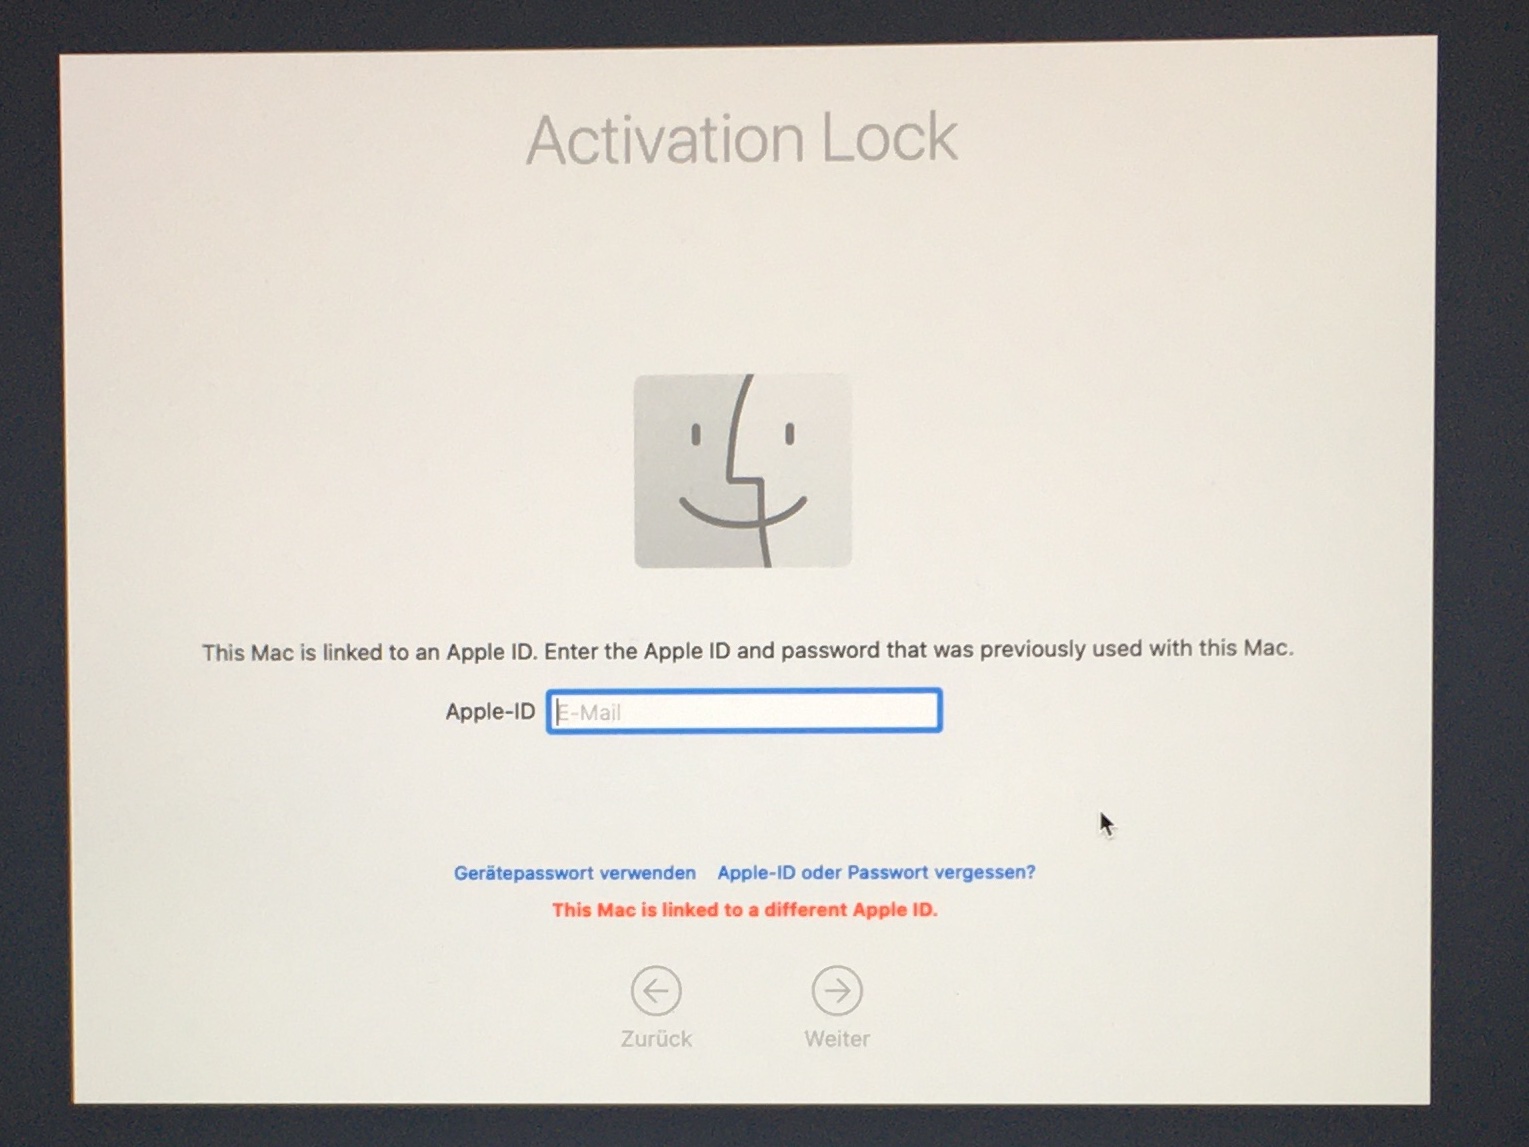 Felix Schwarz on Twitter: "PSA: if your Apple T2 Mac turns into an Activation Lock-ed brick during #macOS Big Sur installation - and then won't accept your password, won't accept your Apple